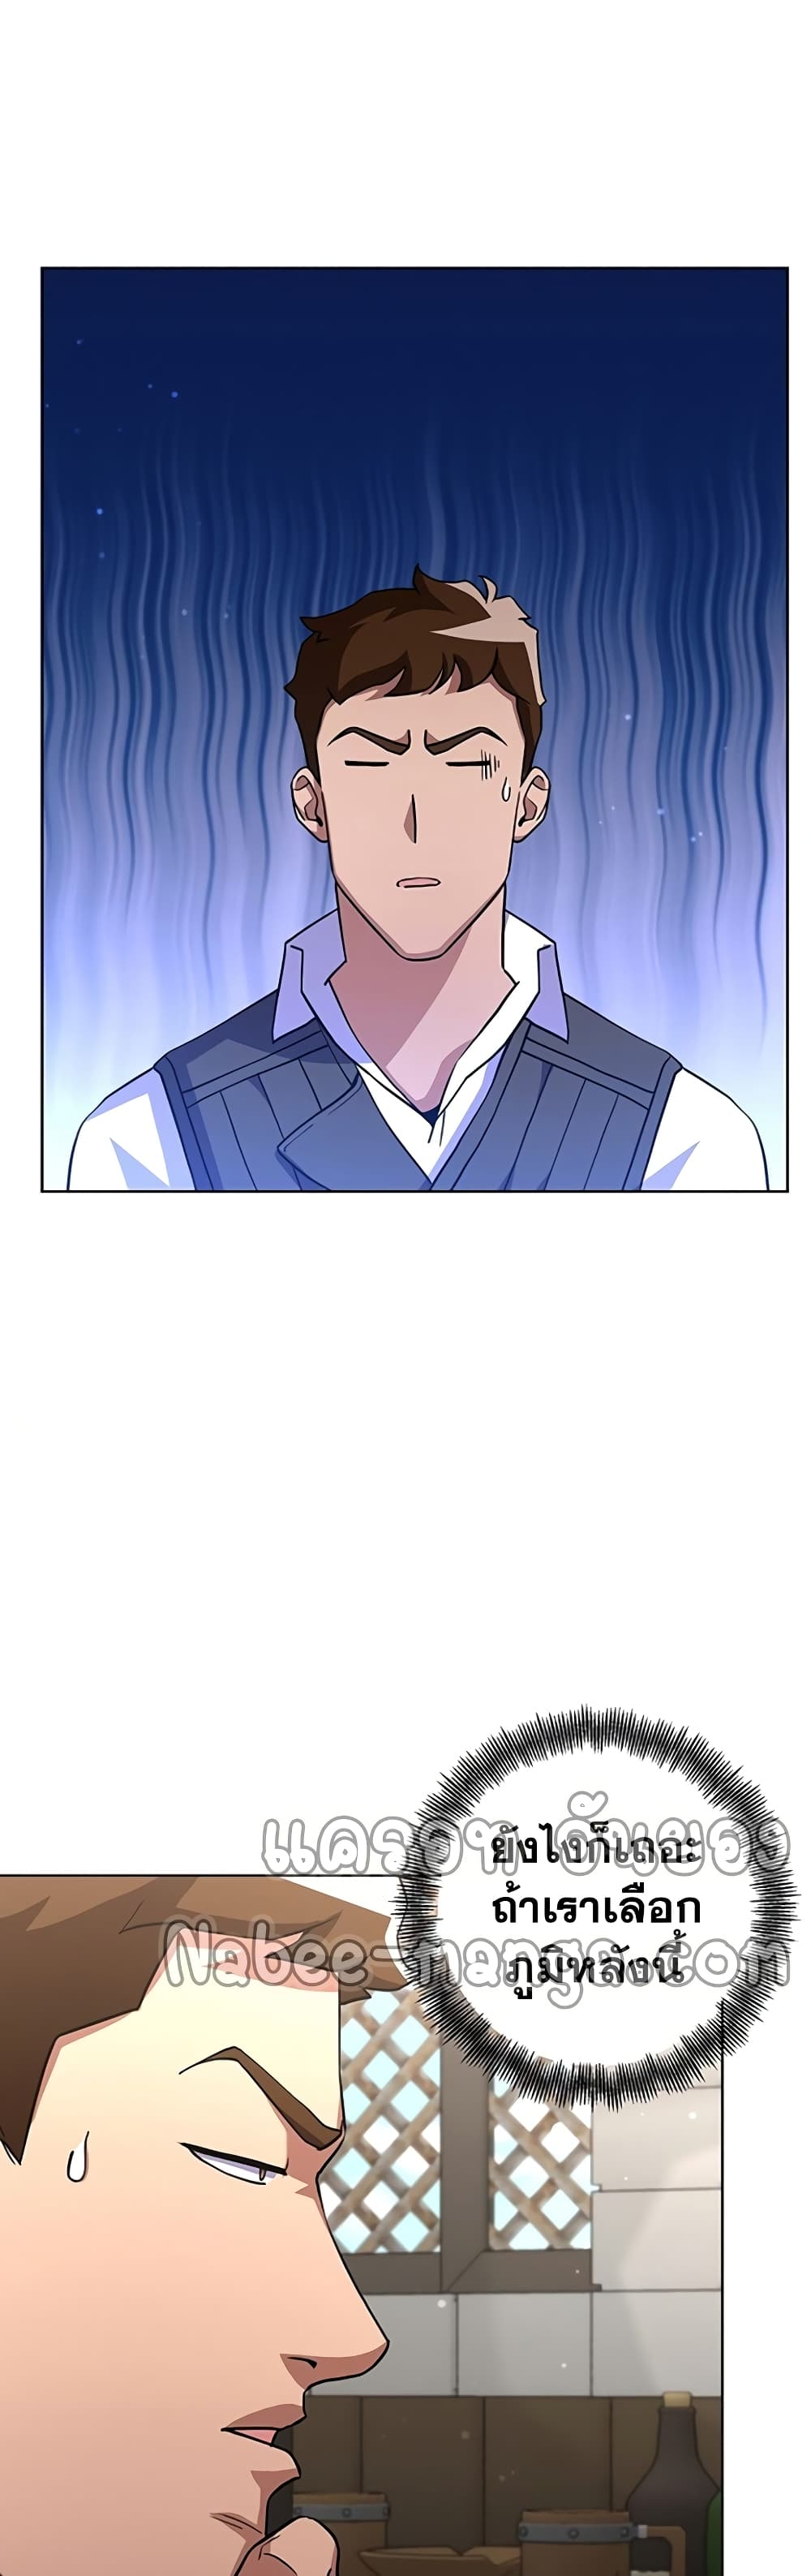 Surviving in an Action Manhwa 17 (8)